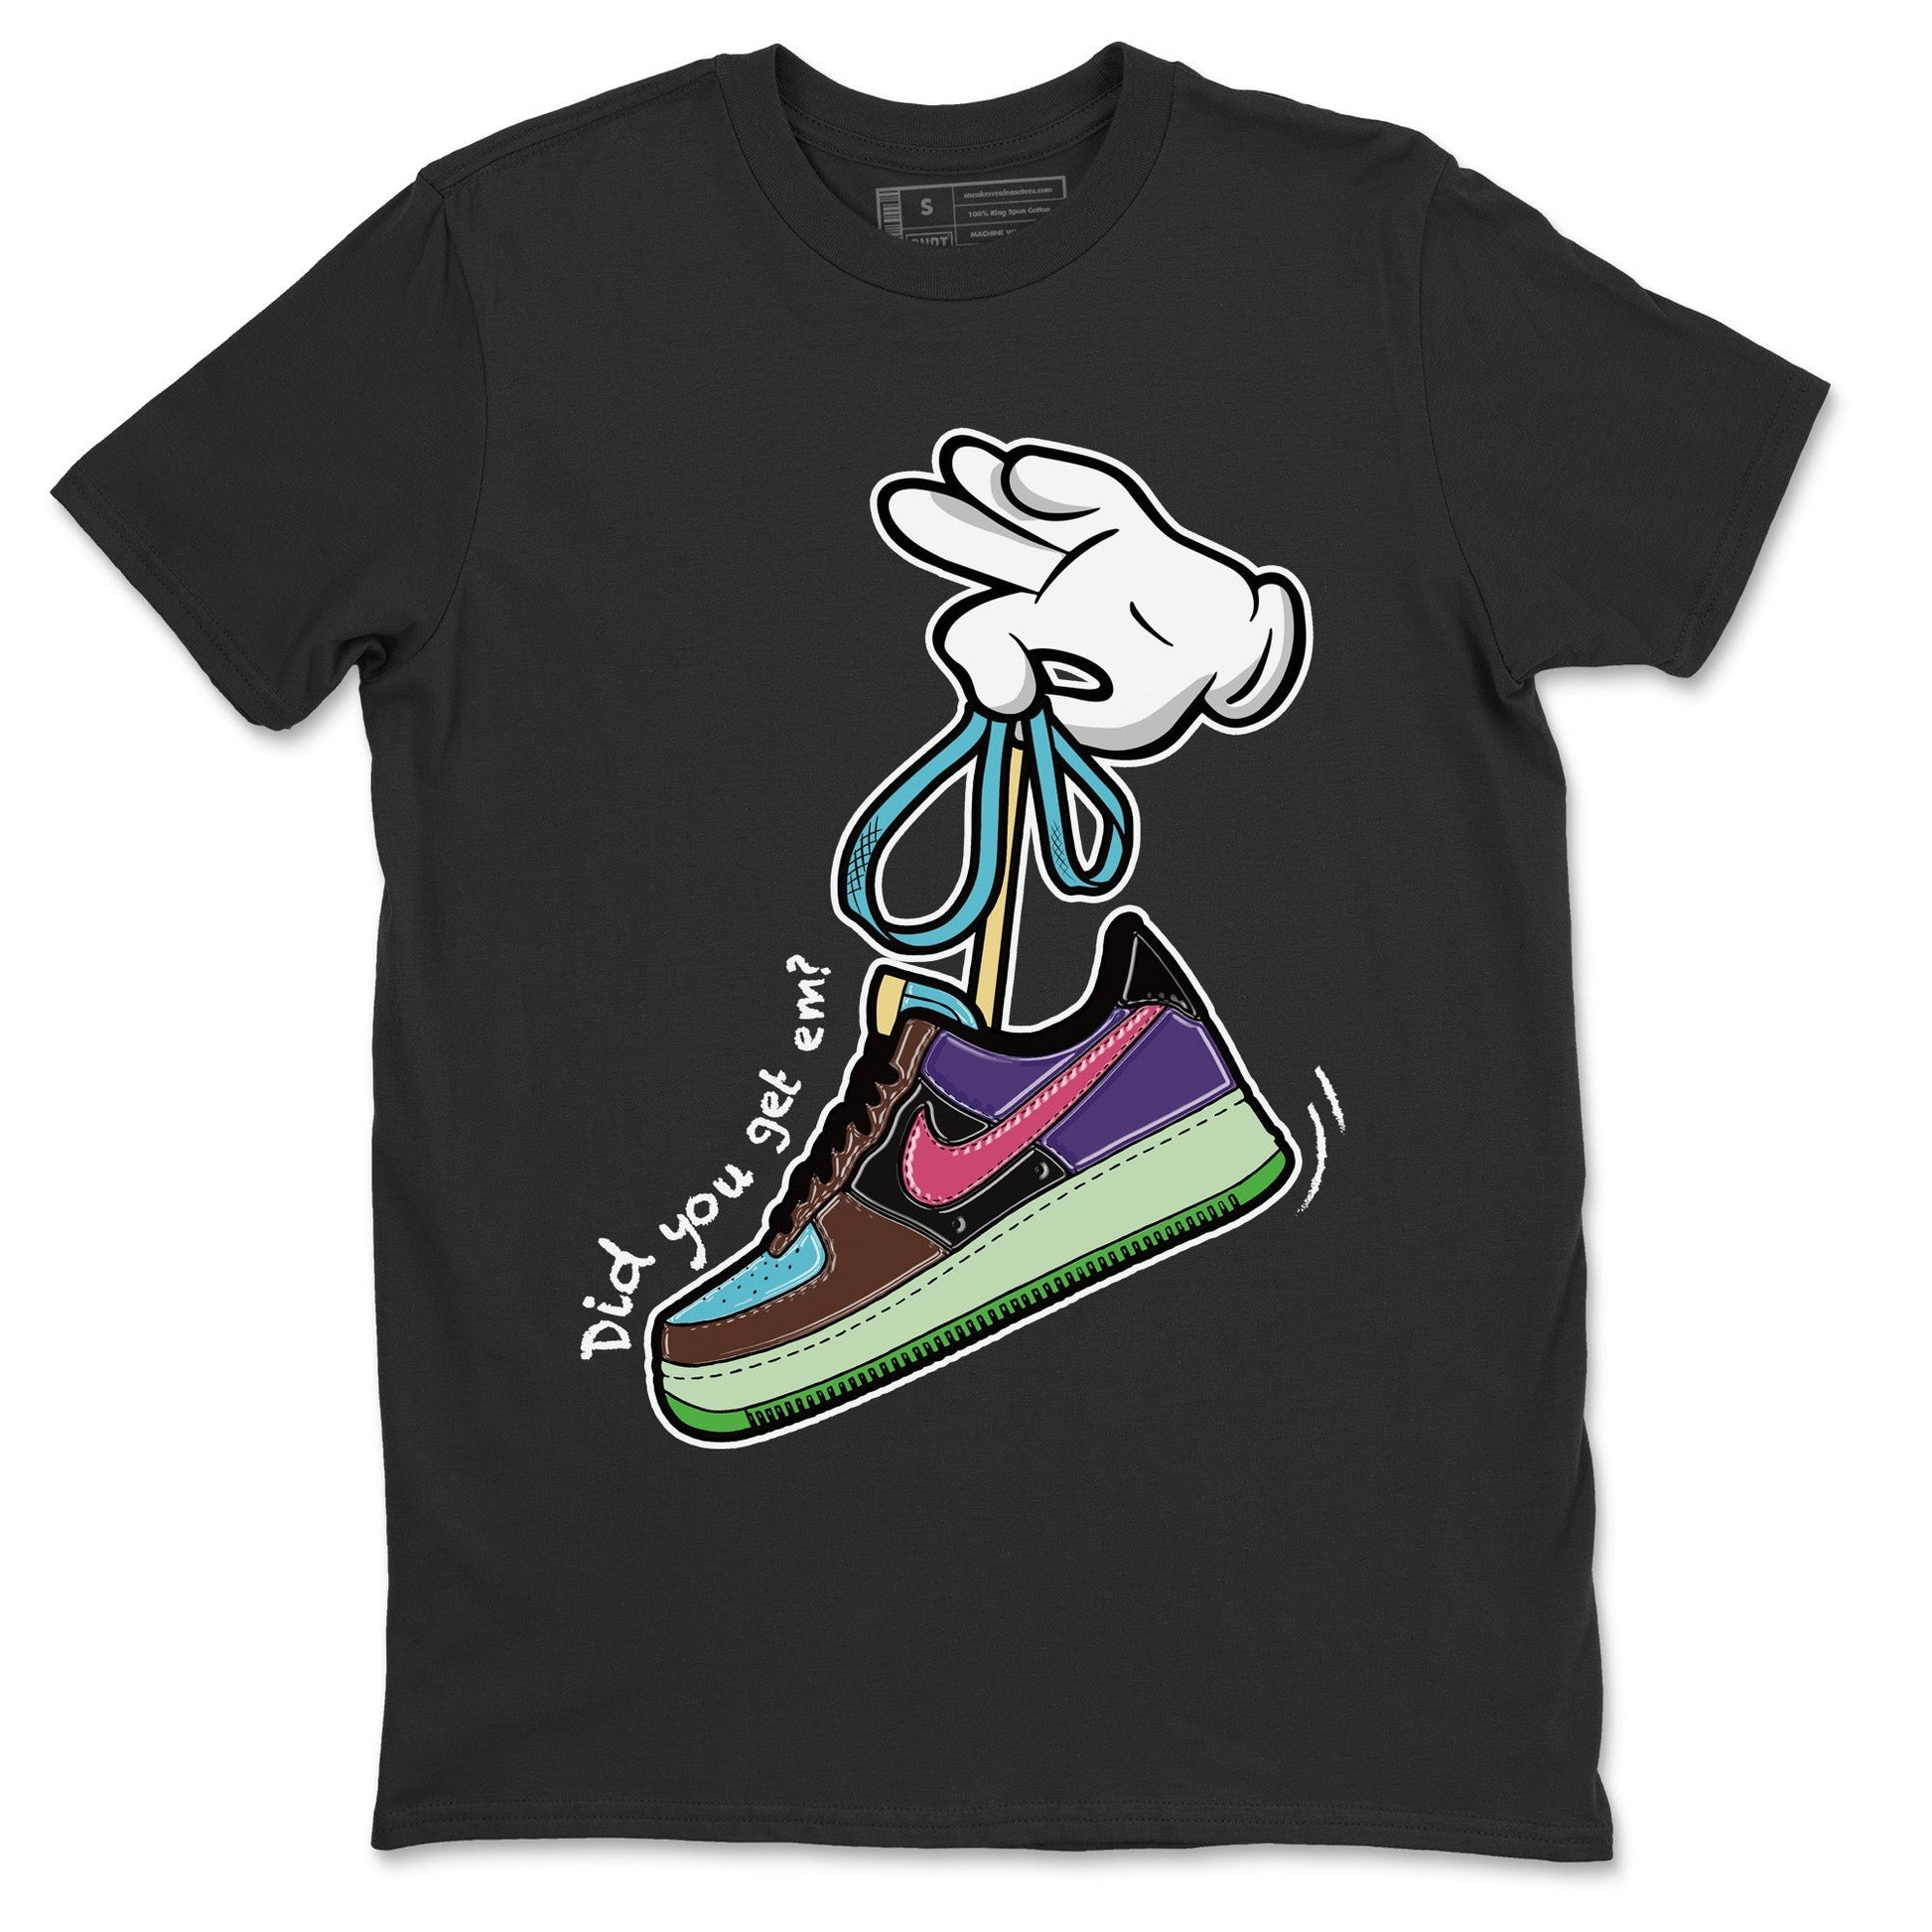 Air Force 1 Undefeated Fauna Brown Sneaker Match Tees Cartoon Hands Sneaker Tees Air Force 1 Undefeated Fauna Brown Sneaker Release Tees Unisex Shirts